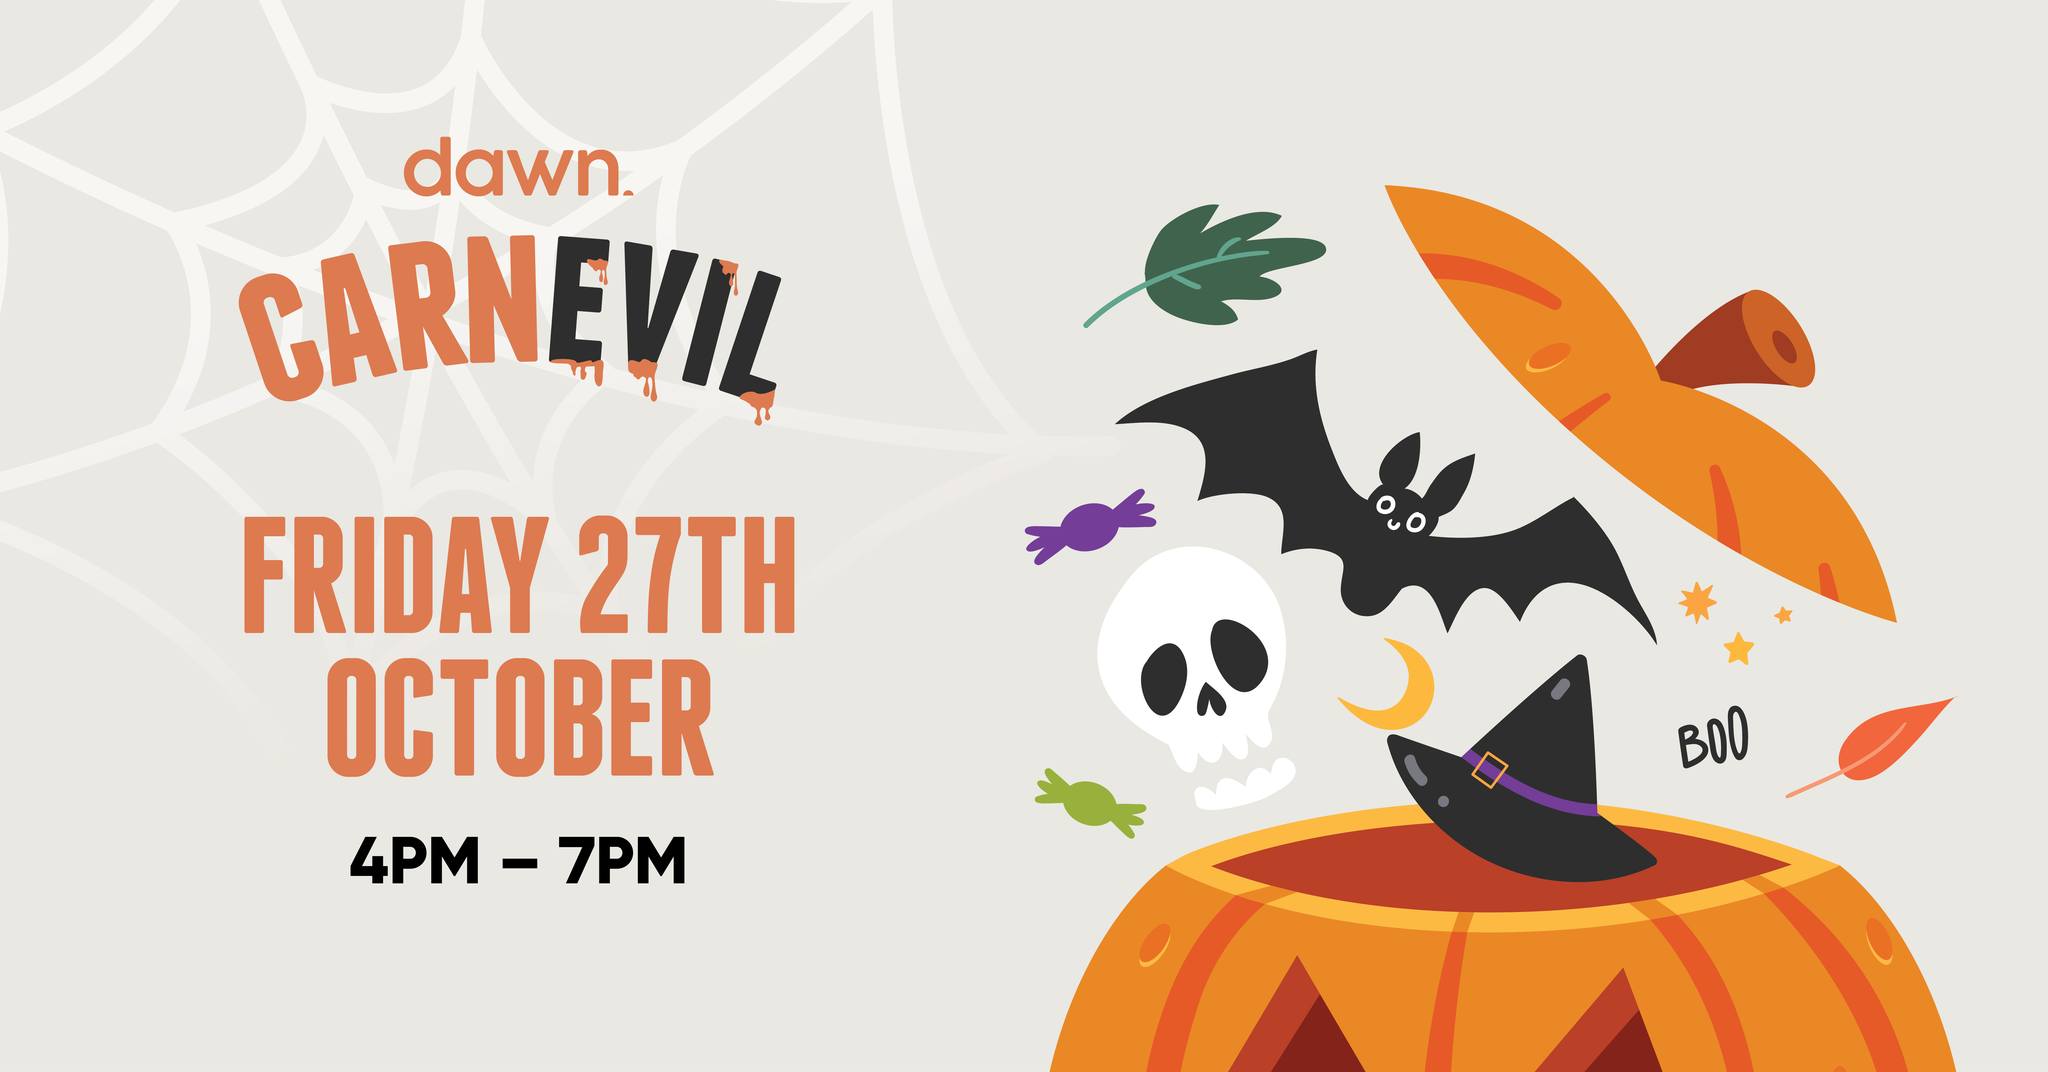 You’re invited to CarnEvil at Dawn!